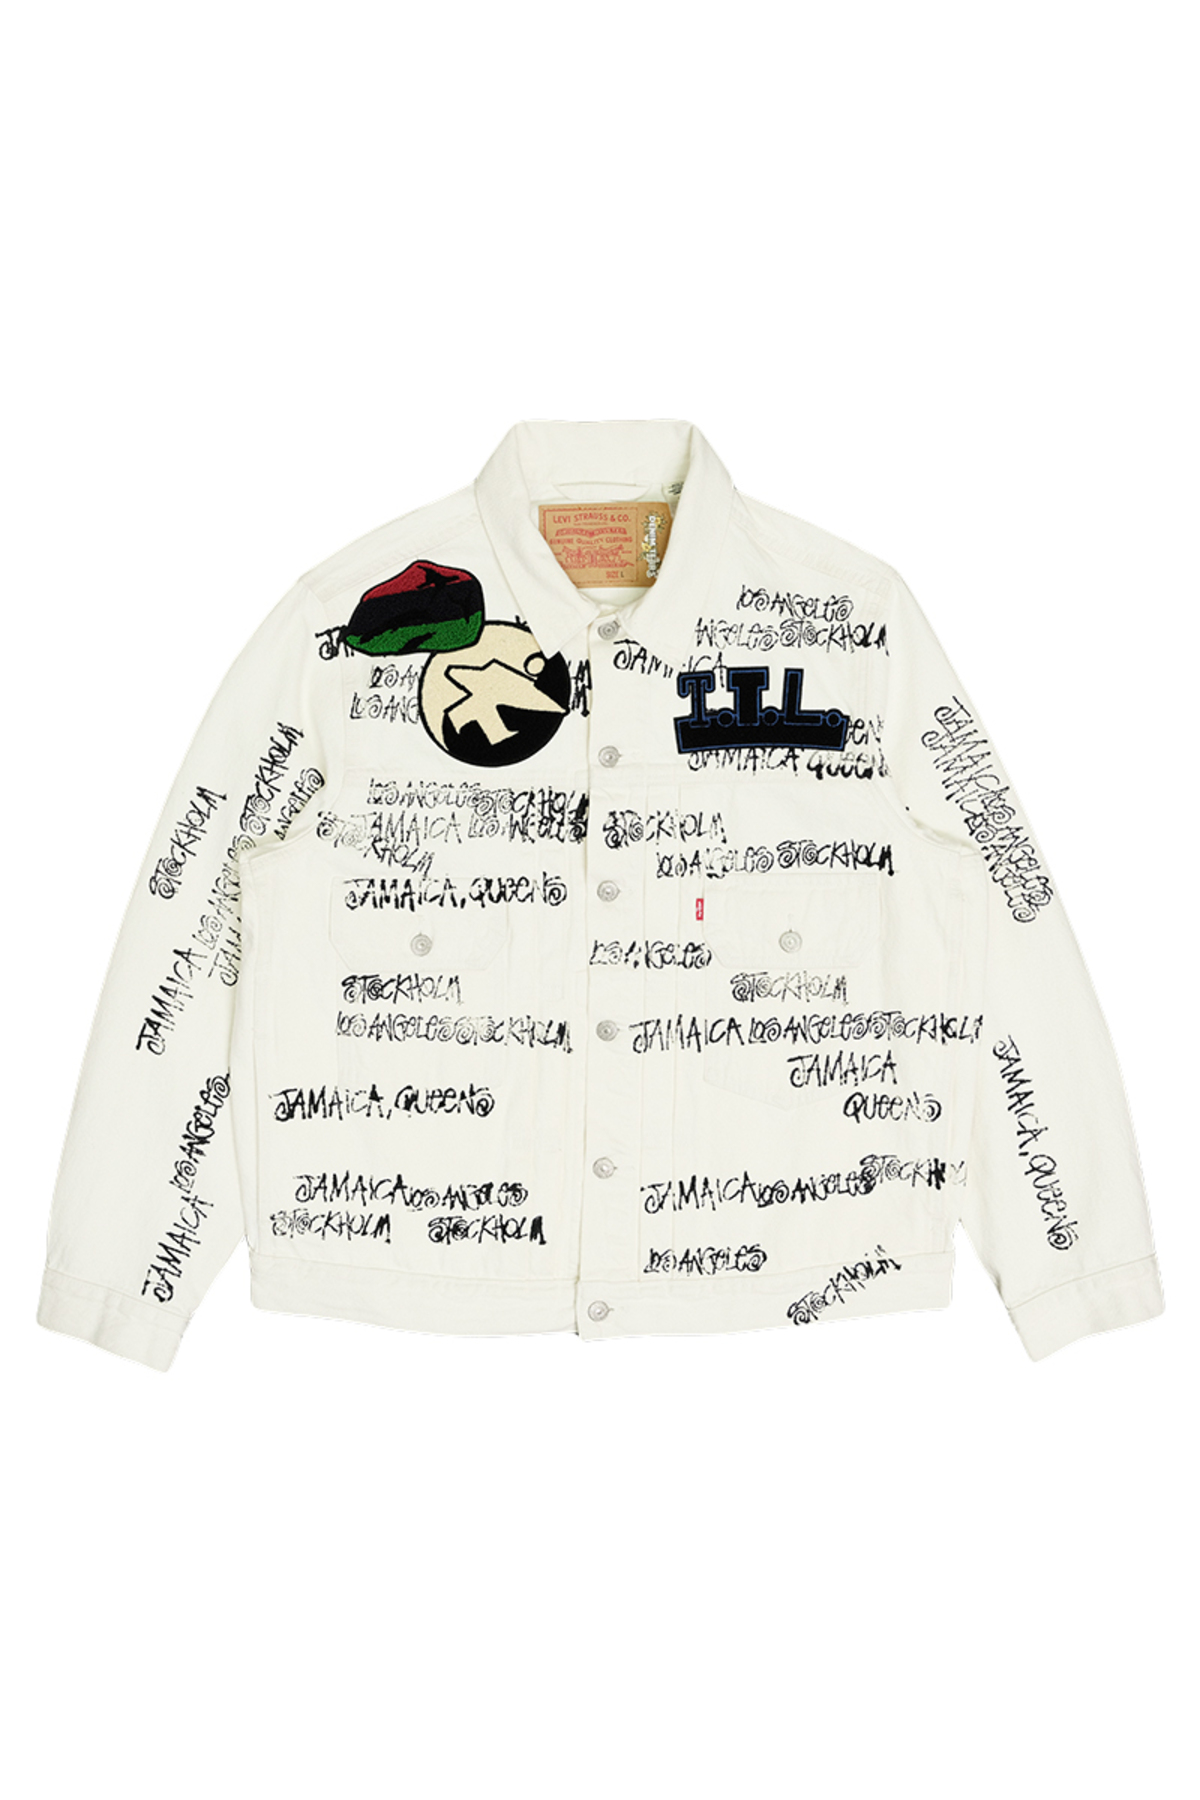 Denim Tears, Stüssy & Our Legacy Set to Join Forces on Collaborative ...